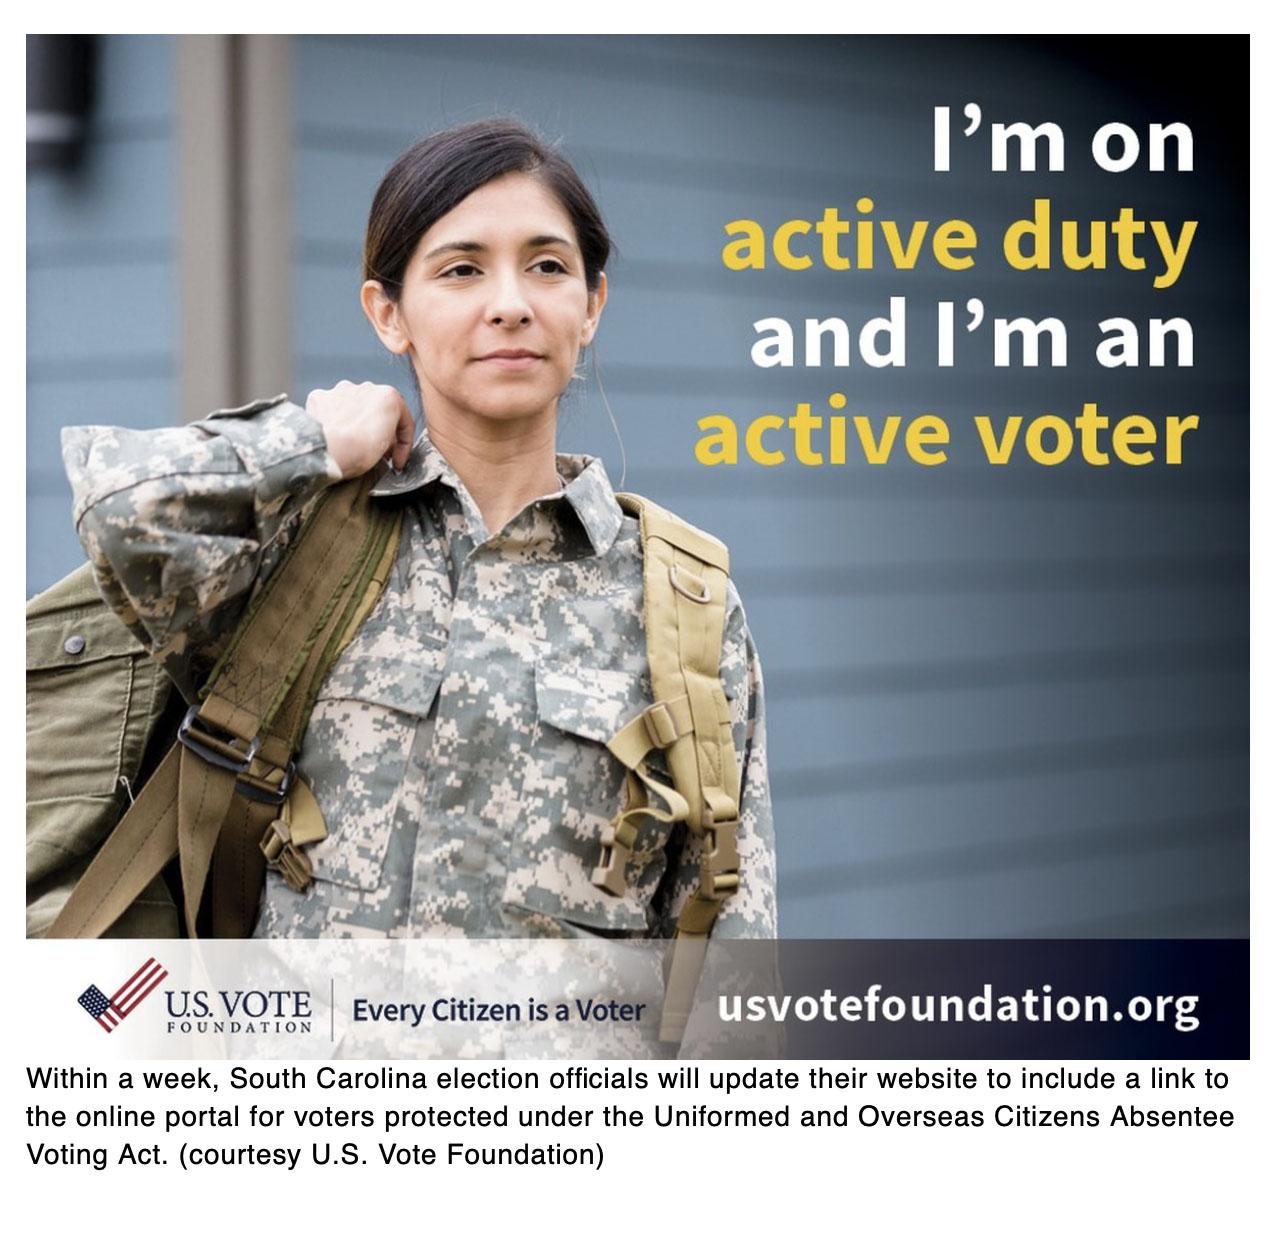  Another state adds online absentee voting option for military and overseas US citizens